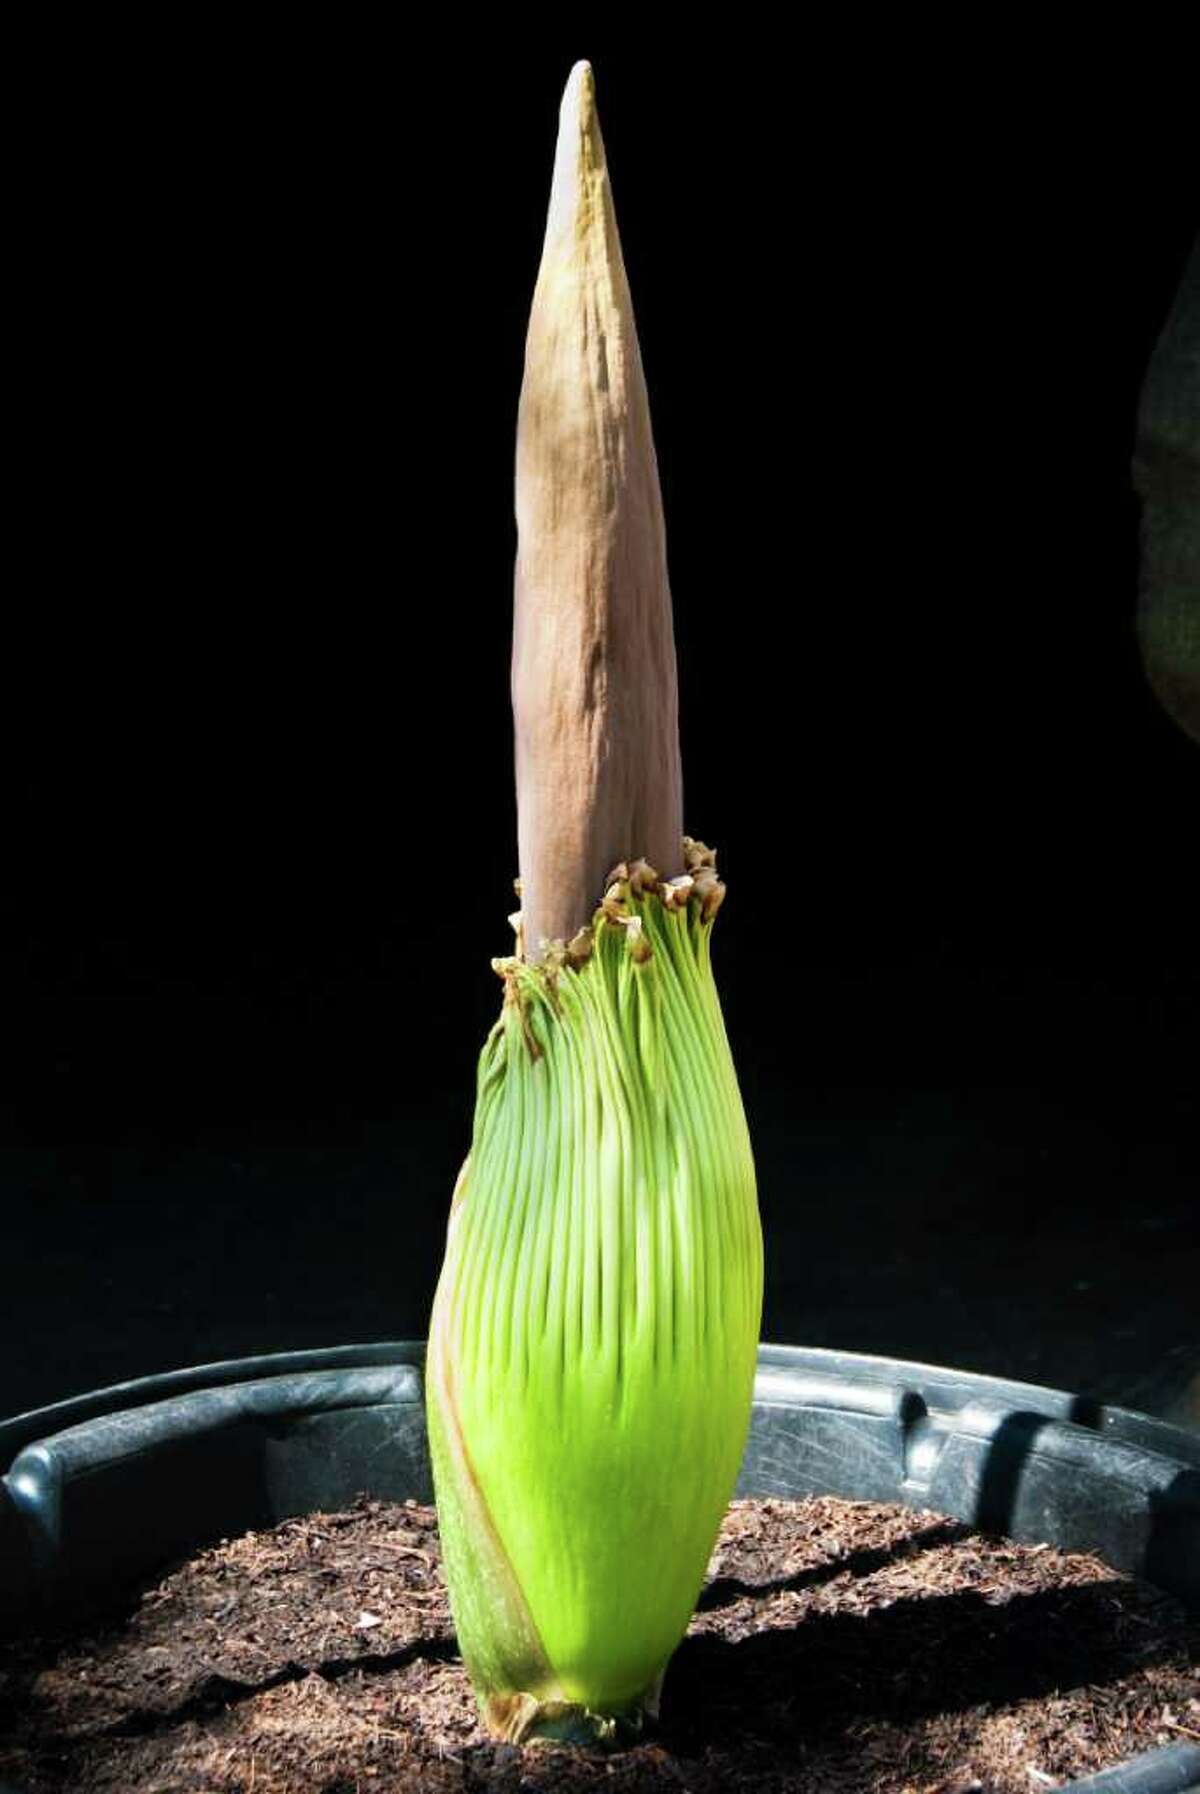 Pewtunia, the Houston Zoo's corpse flower, may bloom this weekend.